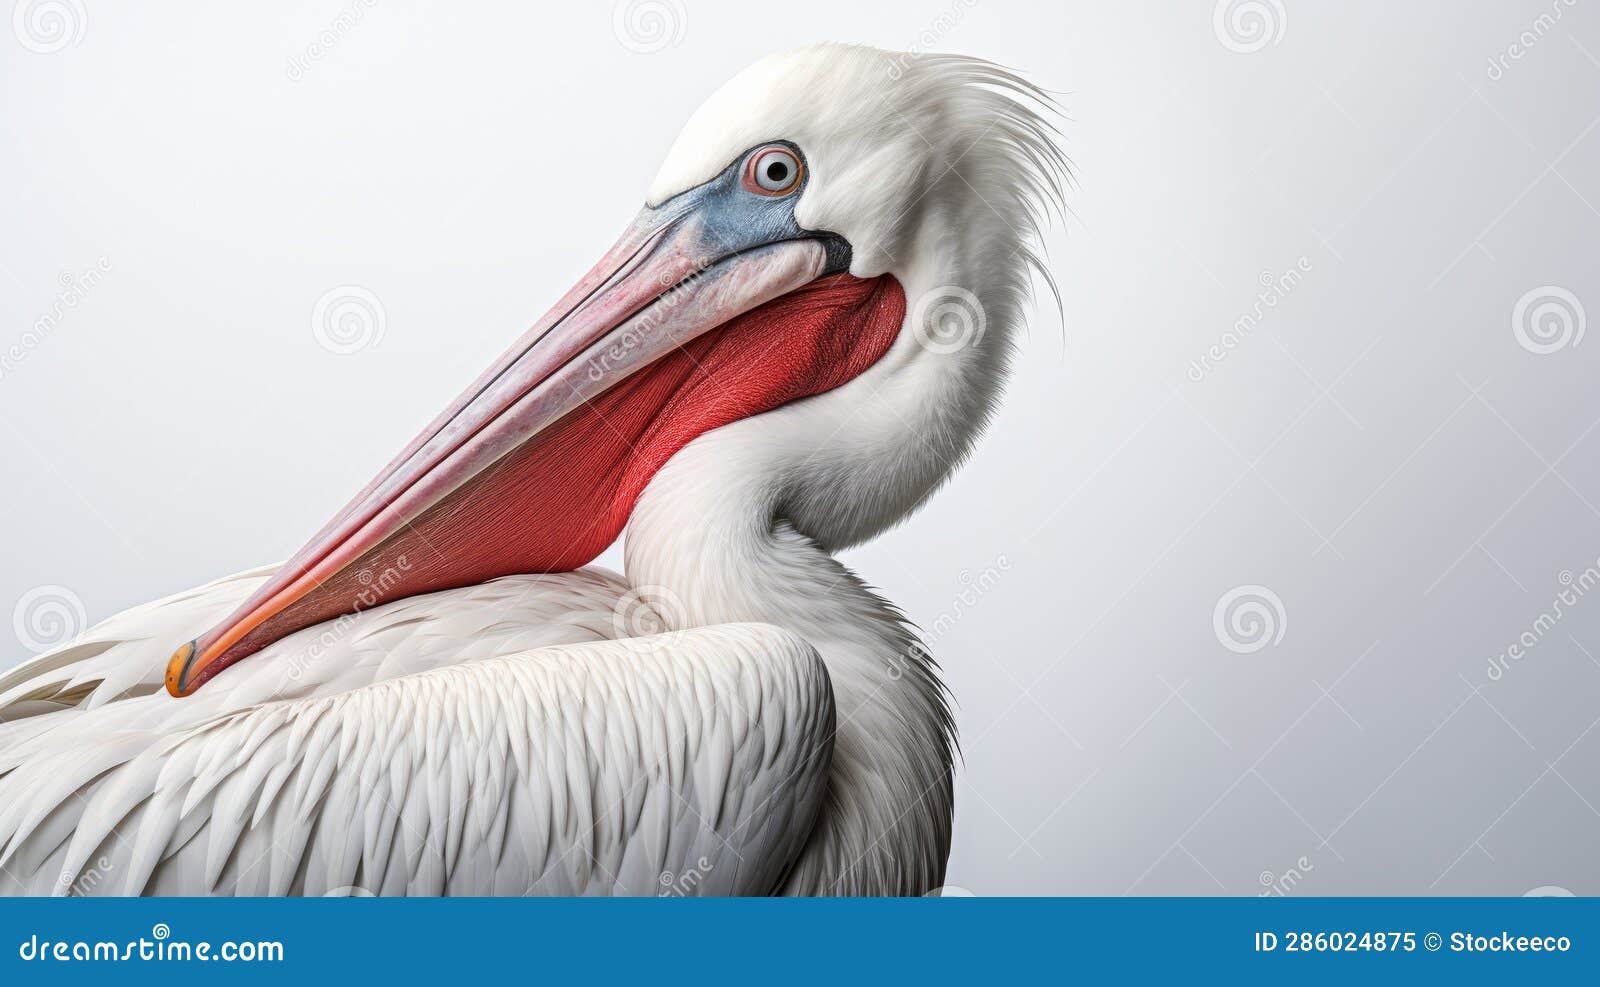 eye-catching white pelican with big beak in peter coulson style